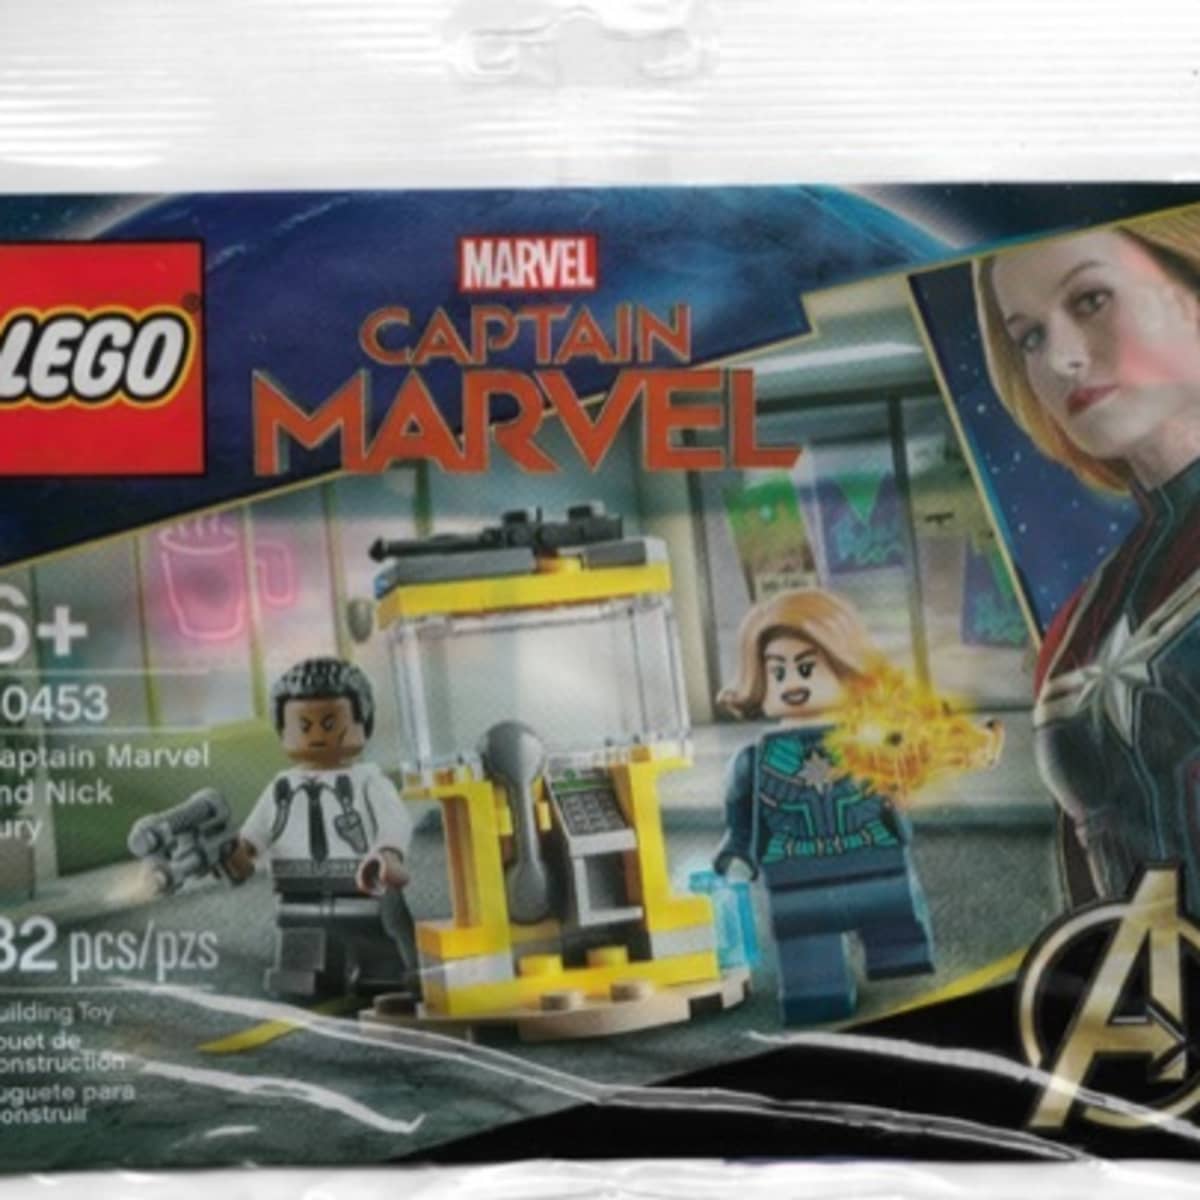 30453 for sale online LEGO Captain Marvel and Nick Fury Polybags